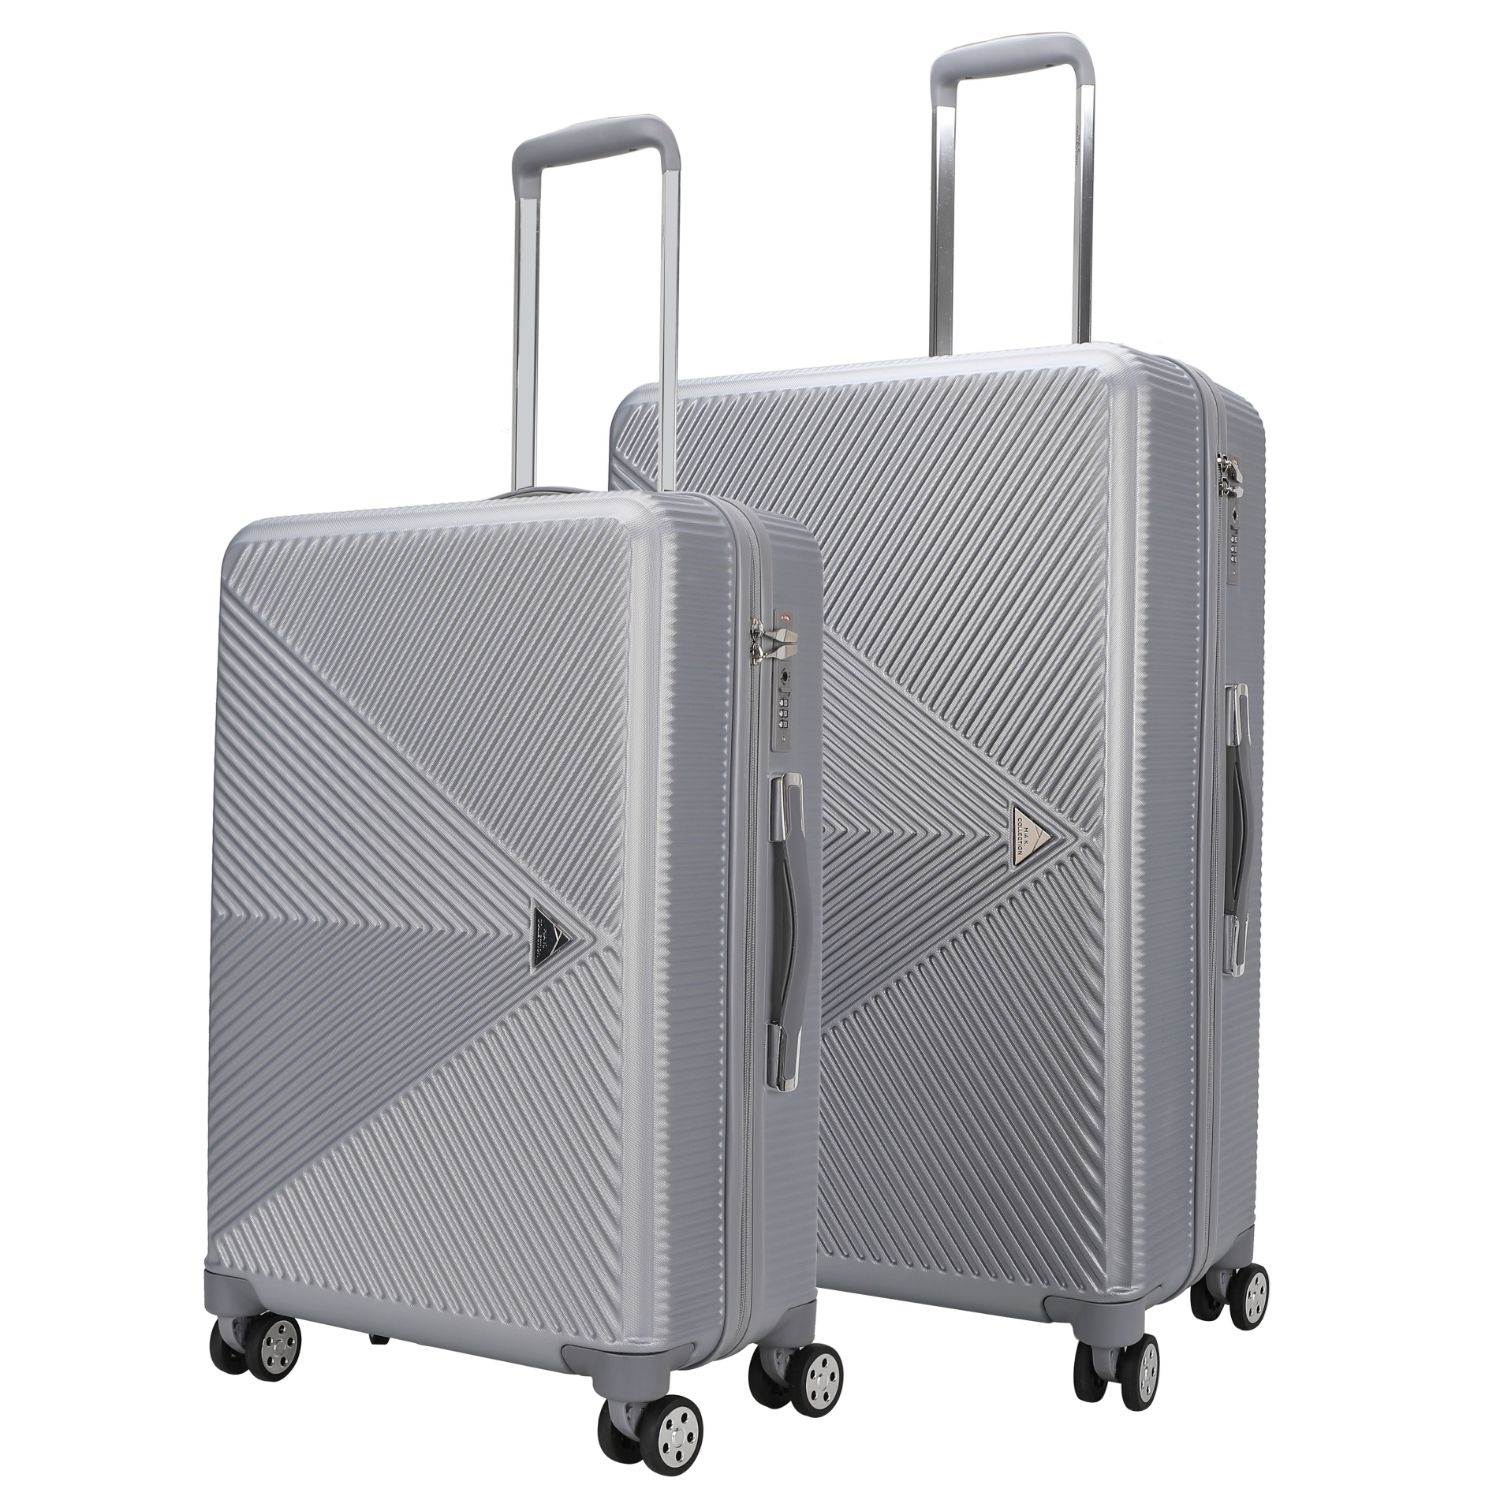 MKF Collection Felicity Luggage Set Extra Large And Large By Mia K- 2 Pieces - Silver